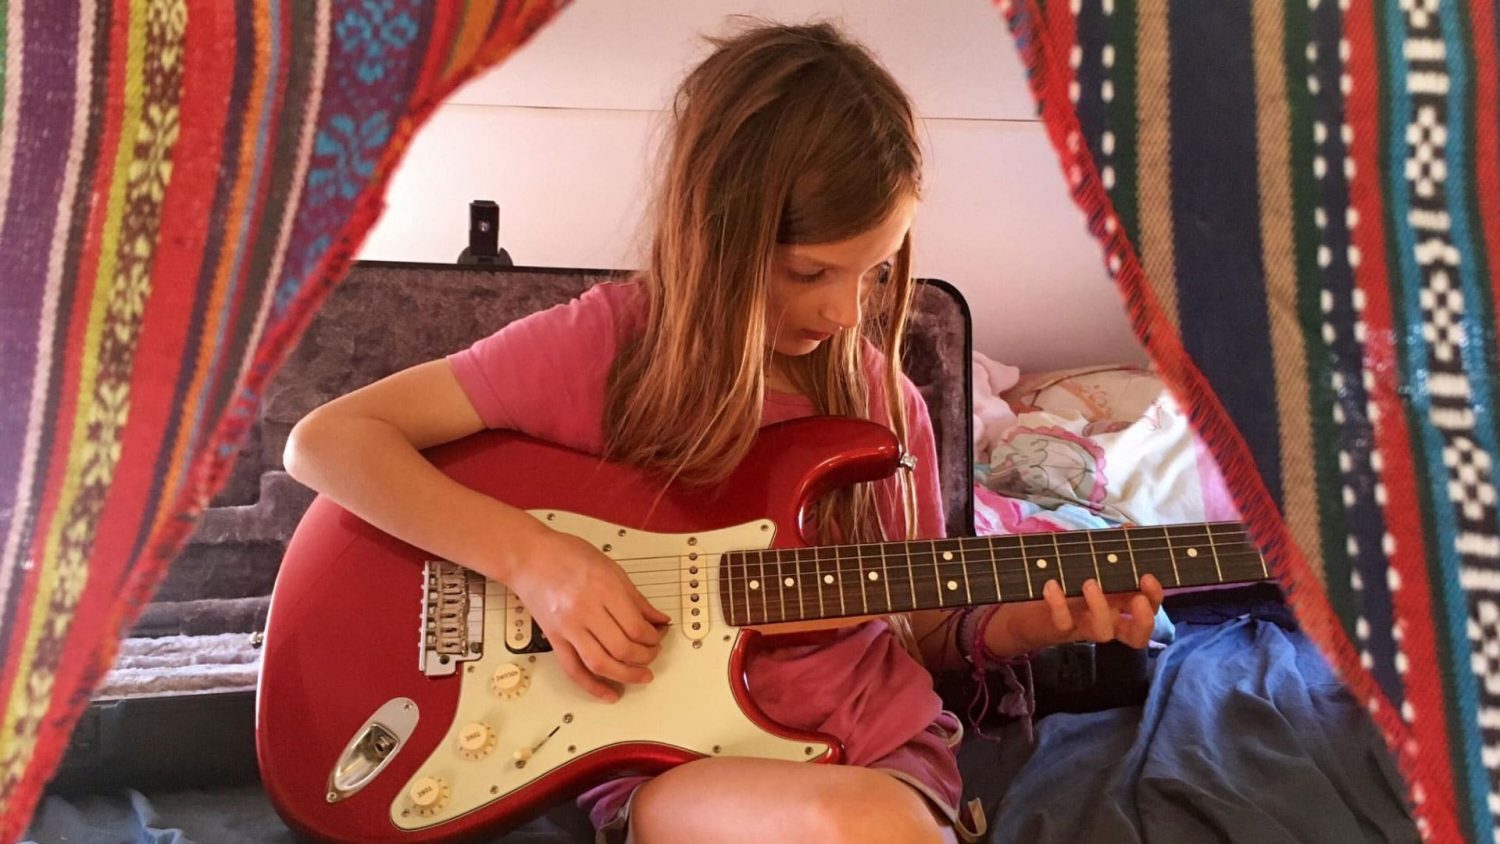 Young girl playing a guitar in a camper van